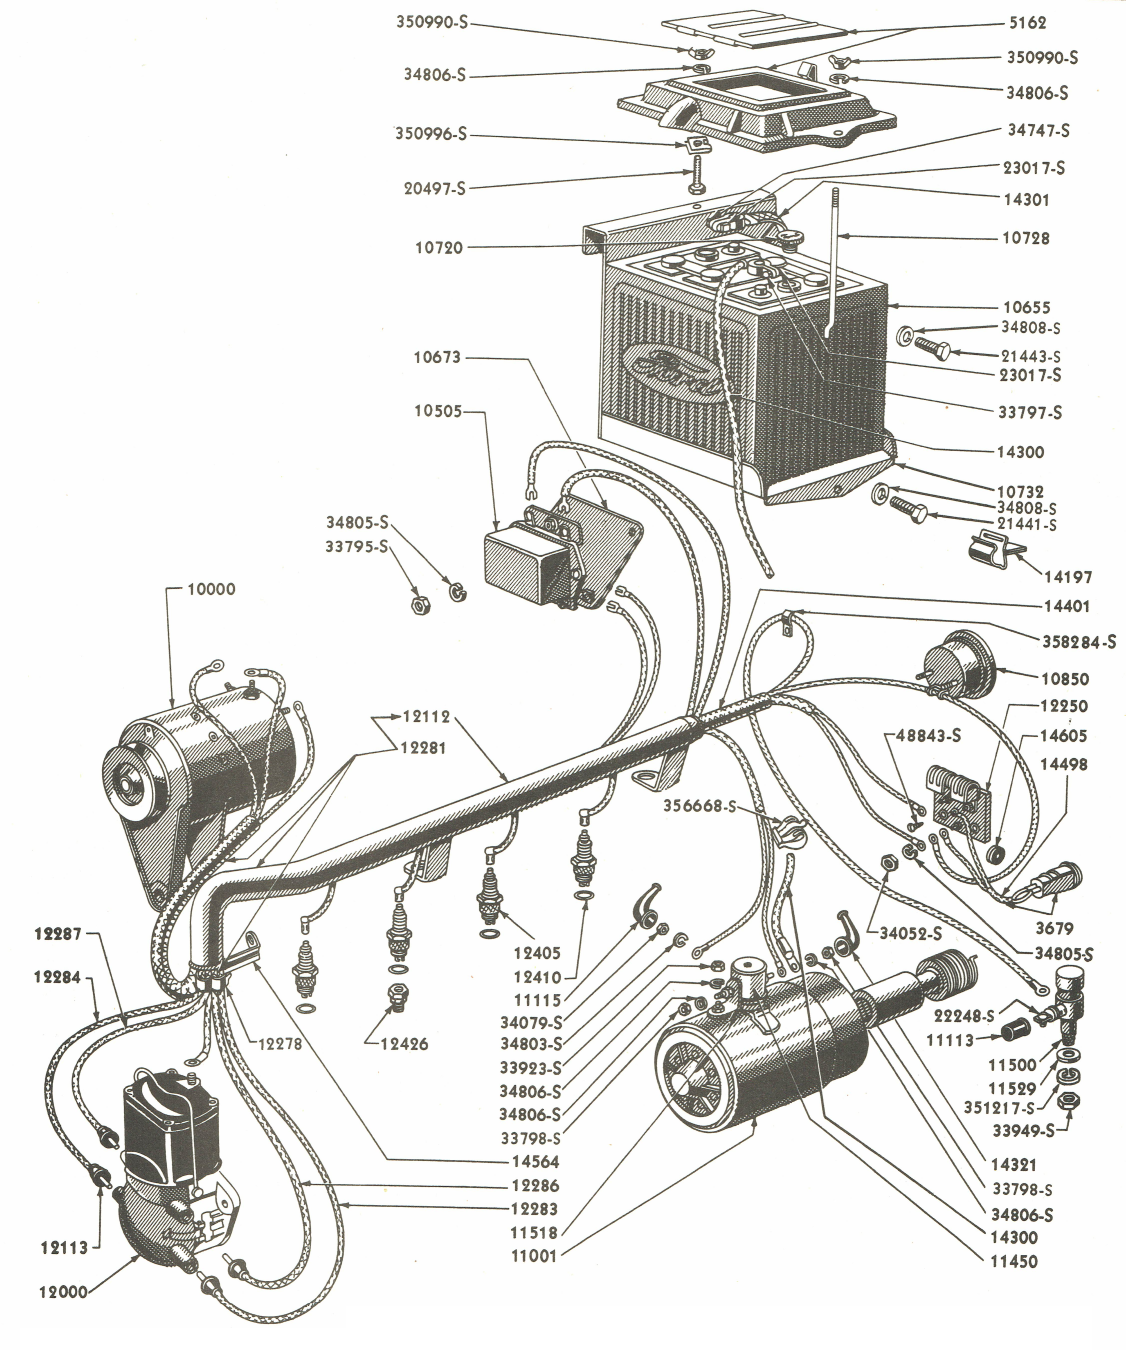 Diagram] Naa Ford Tractor Electrical Wiring Diagram Full